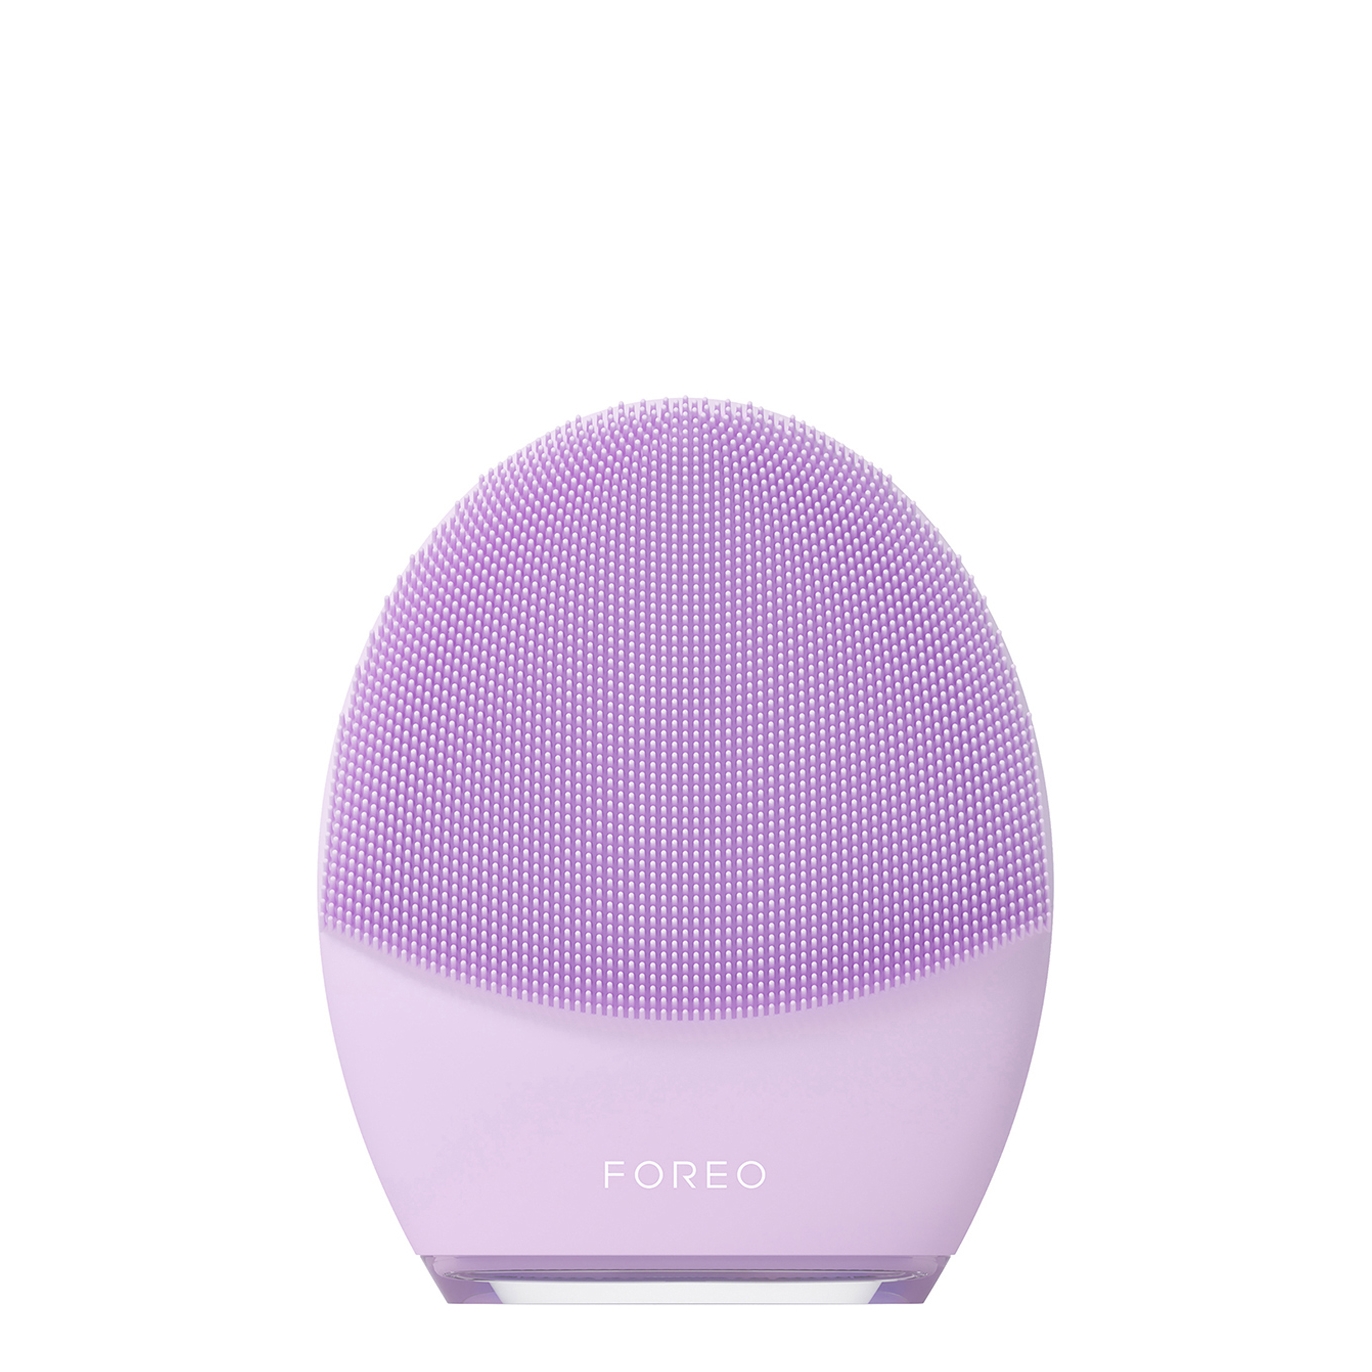 Foreo Luna 4 Smart Facial Cleansing & Firming Massage Device For Sensitive Skin